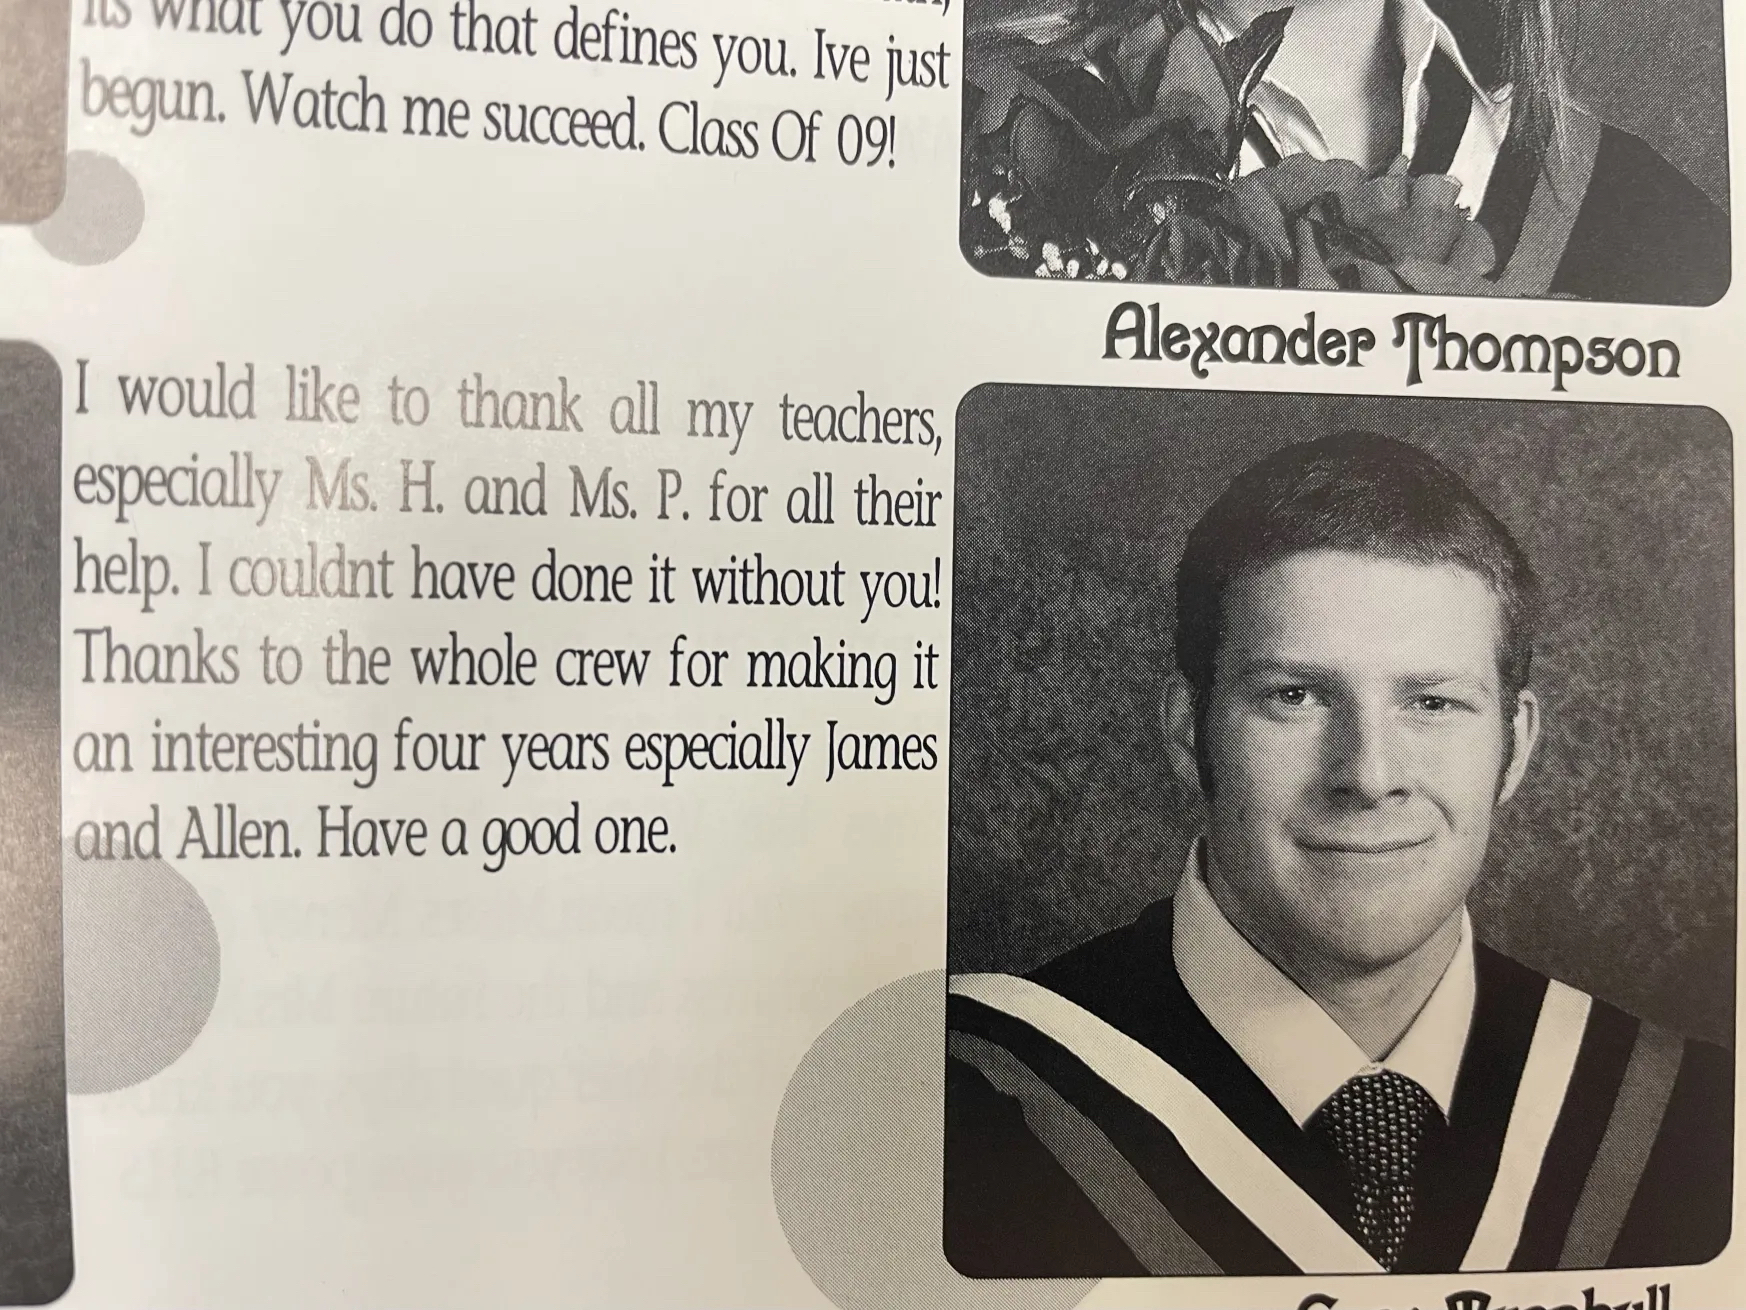 Yearbook Entry Reads "I would like to thank all my teachers, especially Ms H. and Ms. P. for all their help. I couldn't have done it without you!Thanks to the whole crew for making it an interesting four years especially James and Allen. Have a good one.